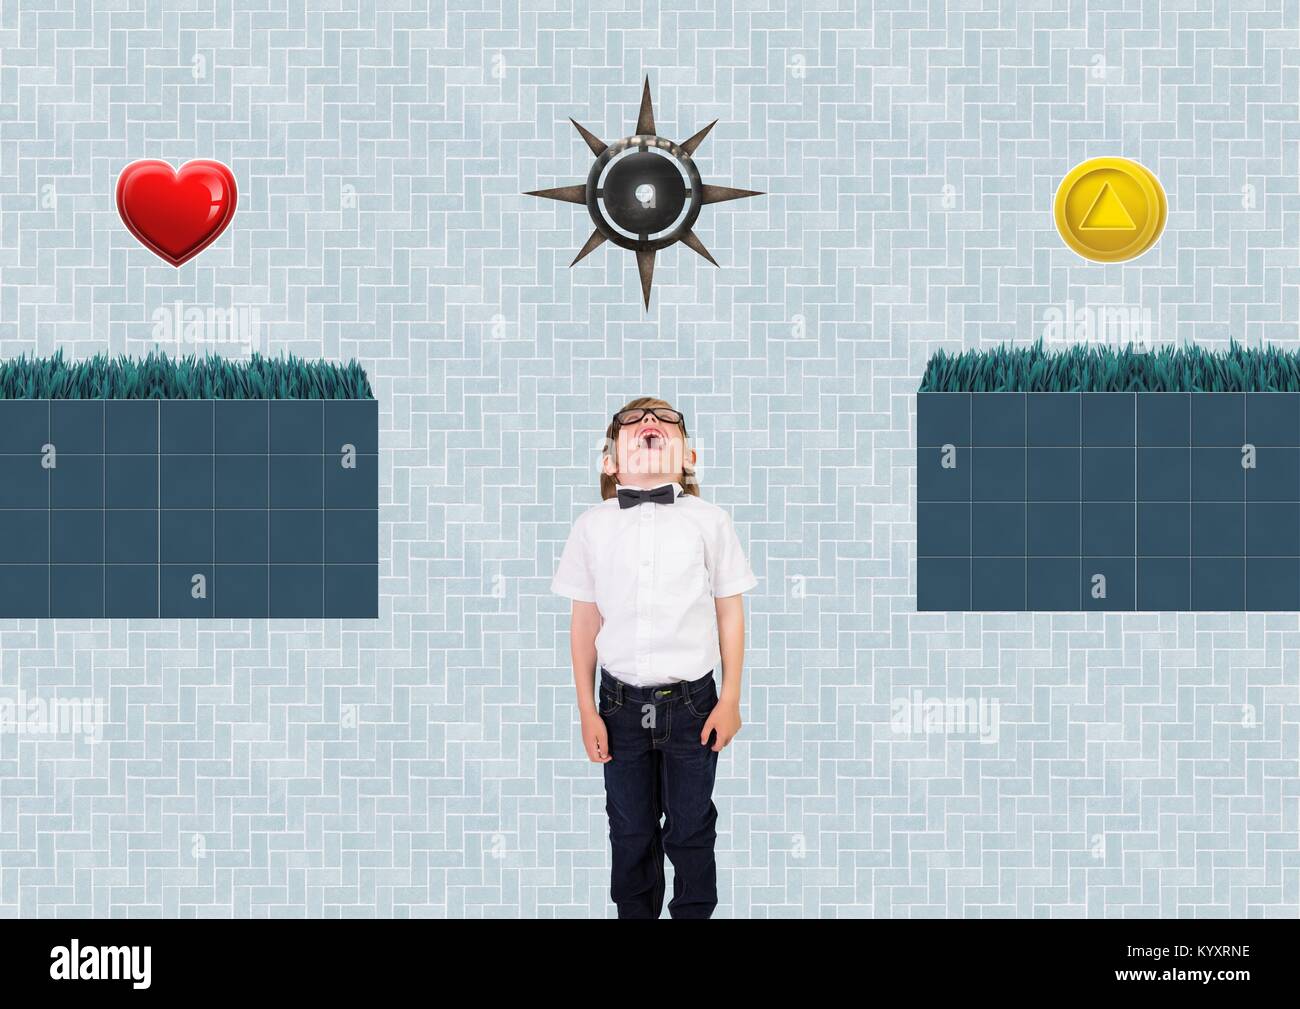 Boy in Computer Game Level with collectibles and traps Stock Photo